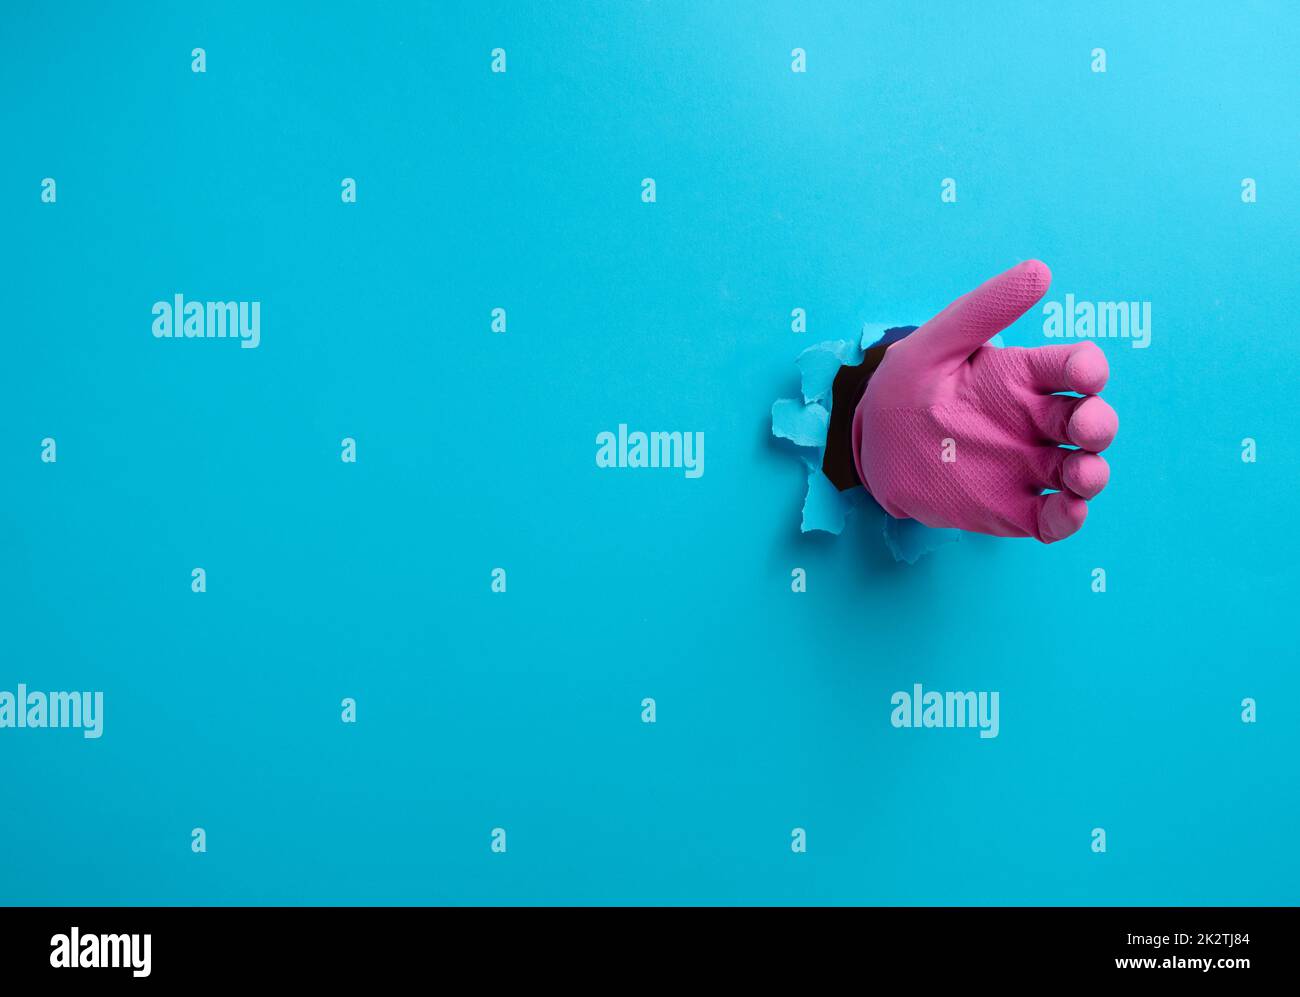 a hand in a pink latex glove holds an object, a part of the body sticks out of a torn hole in a blue paper background Stock Photo